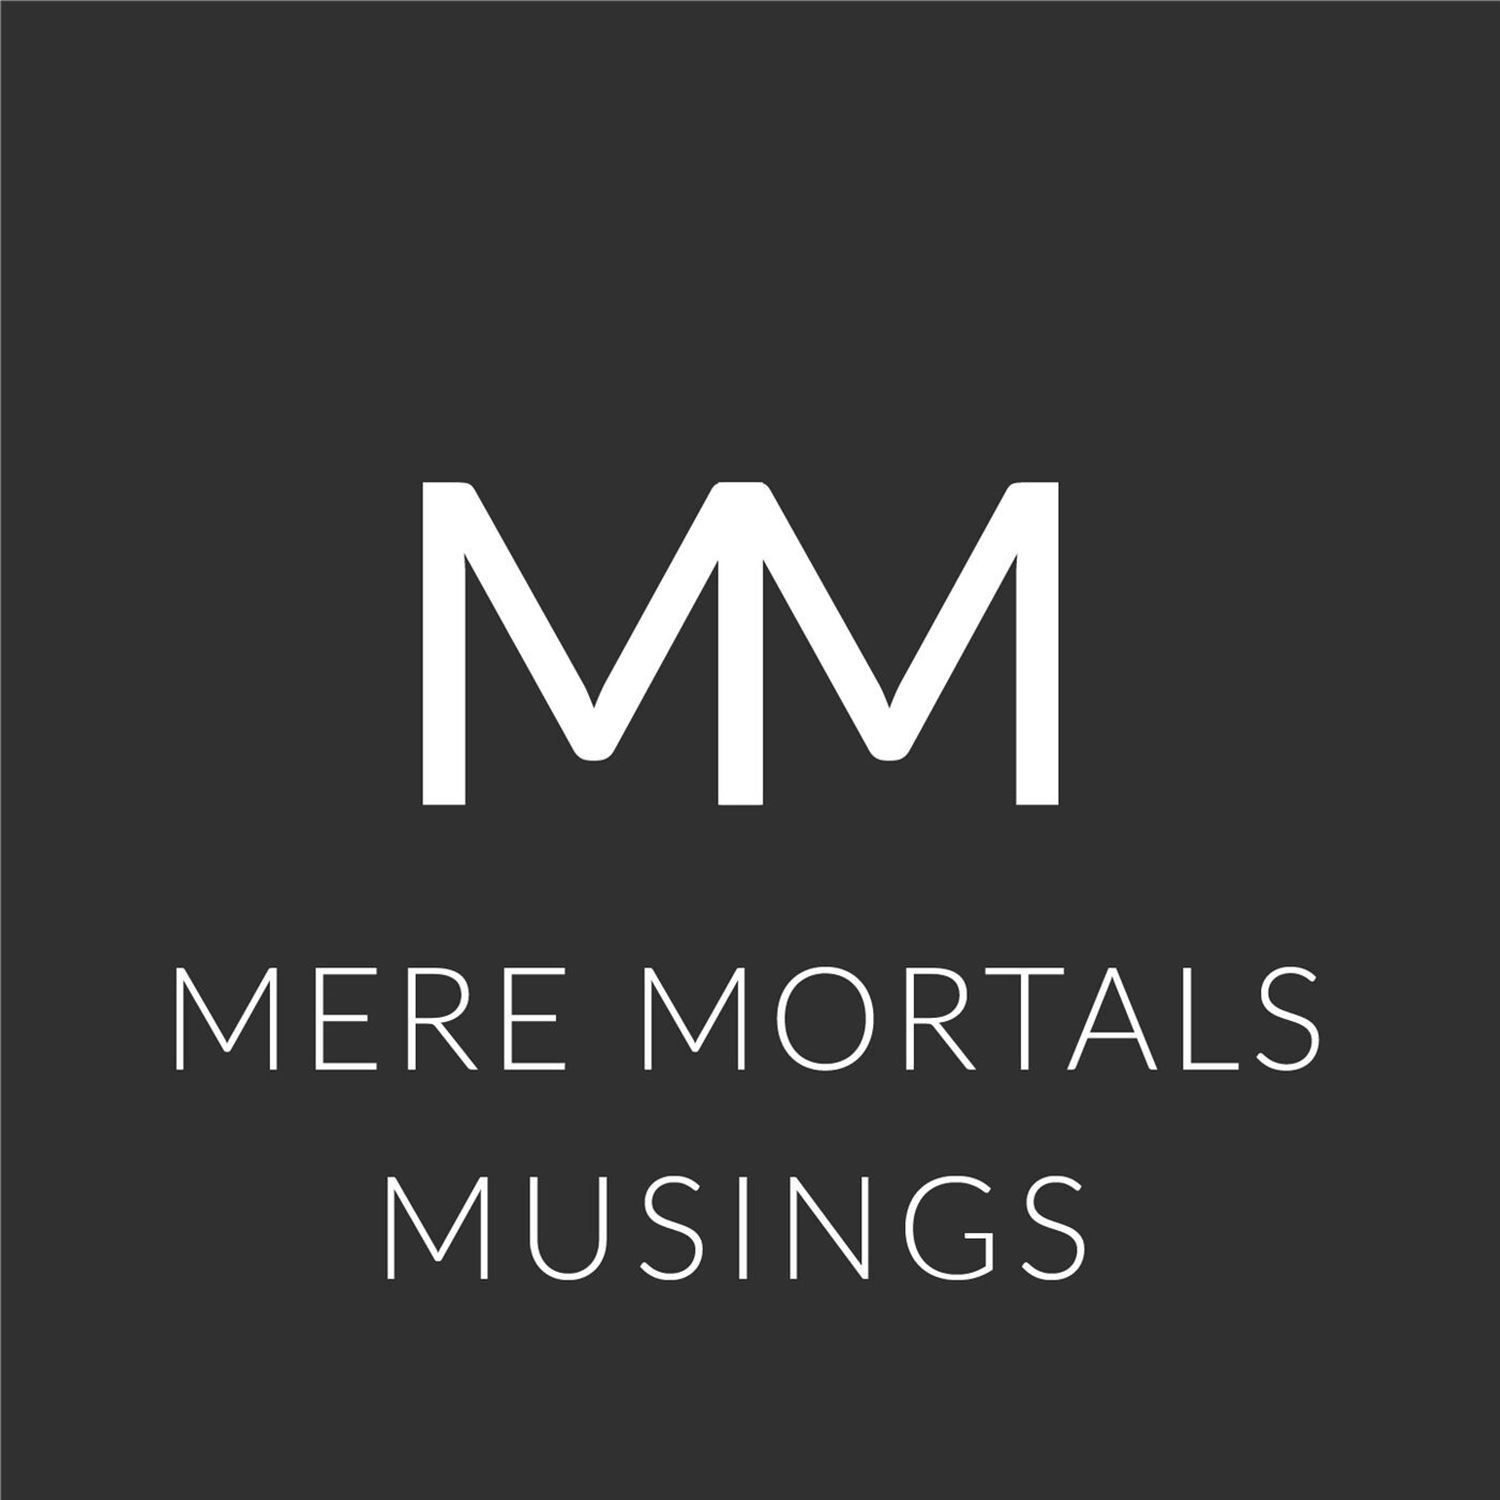 Life Is A Locked Room (Mere Mortals Episode #87 - Musings)